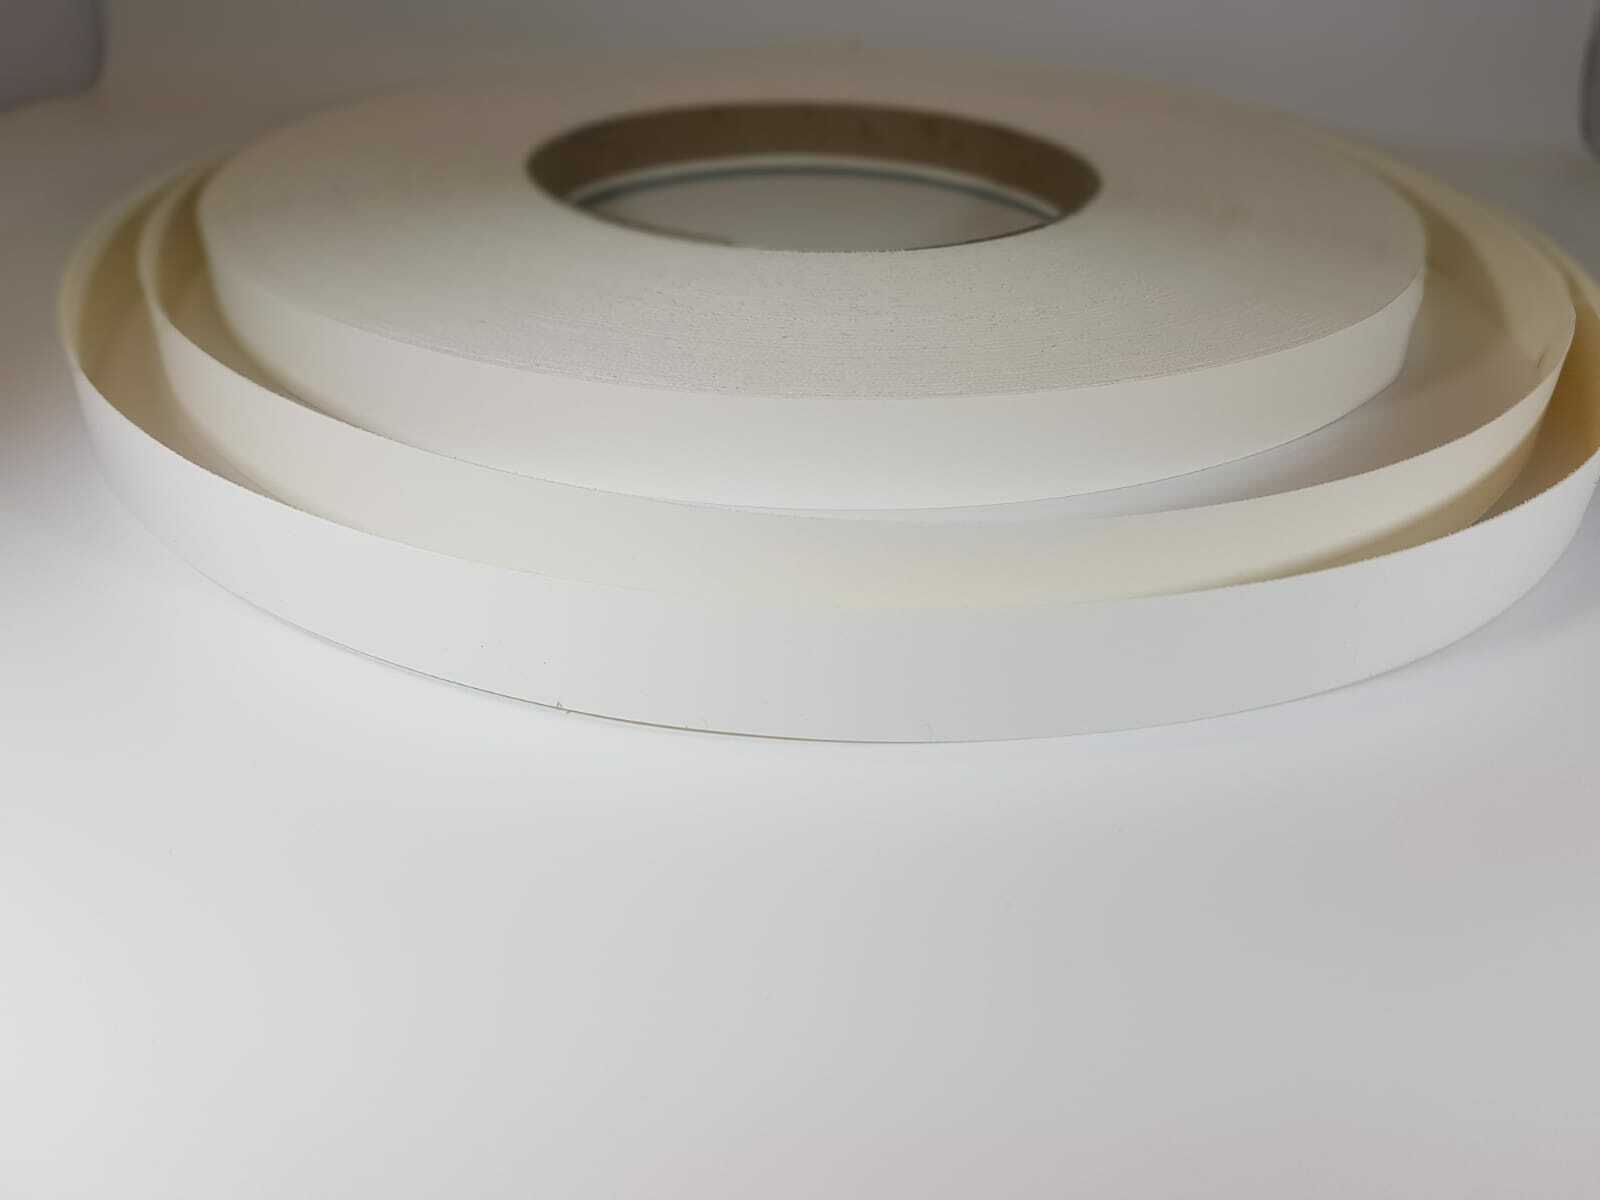 Pre-Glued White Paintable Edging Tape Melamine Smooth 0.4mm thick - 100M